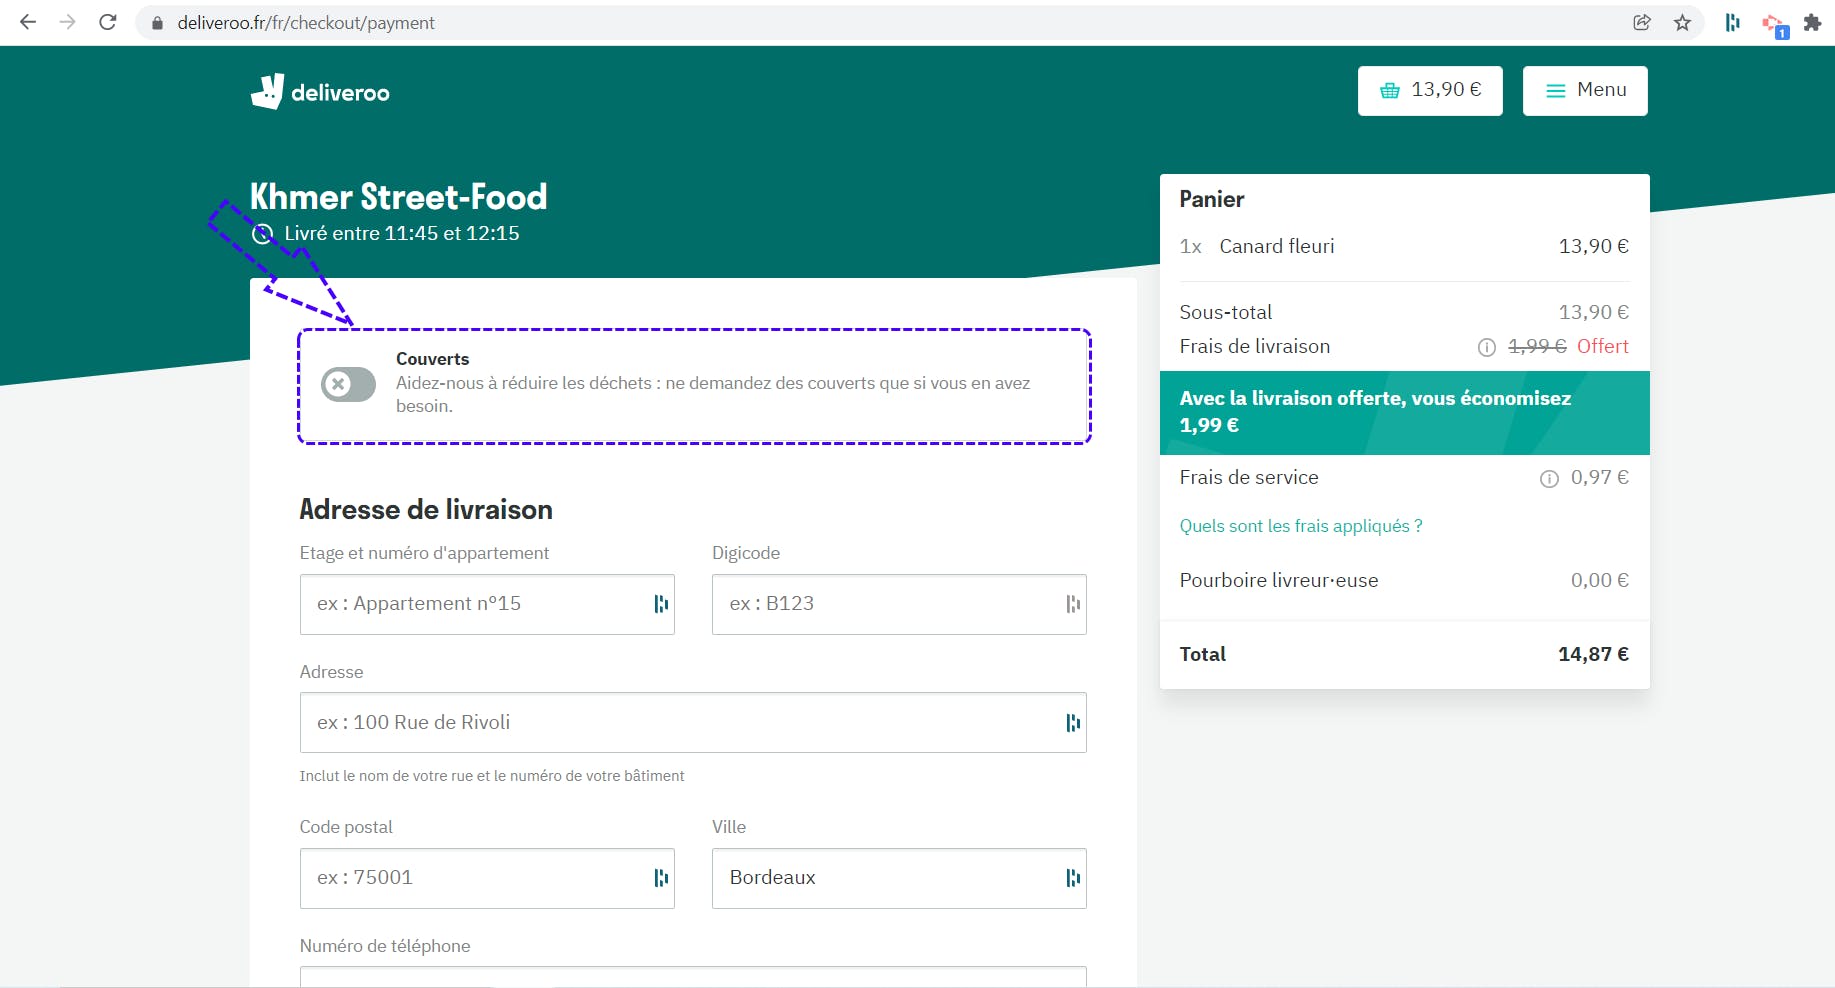 Deliveroo-page-paiement-fr-option-couverts-underlined.png